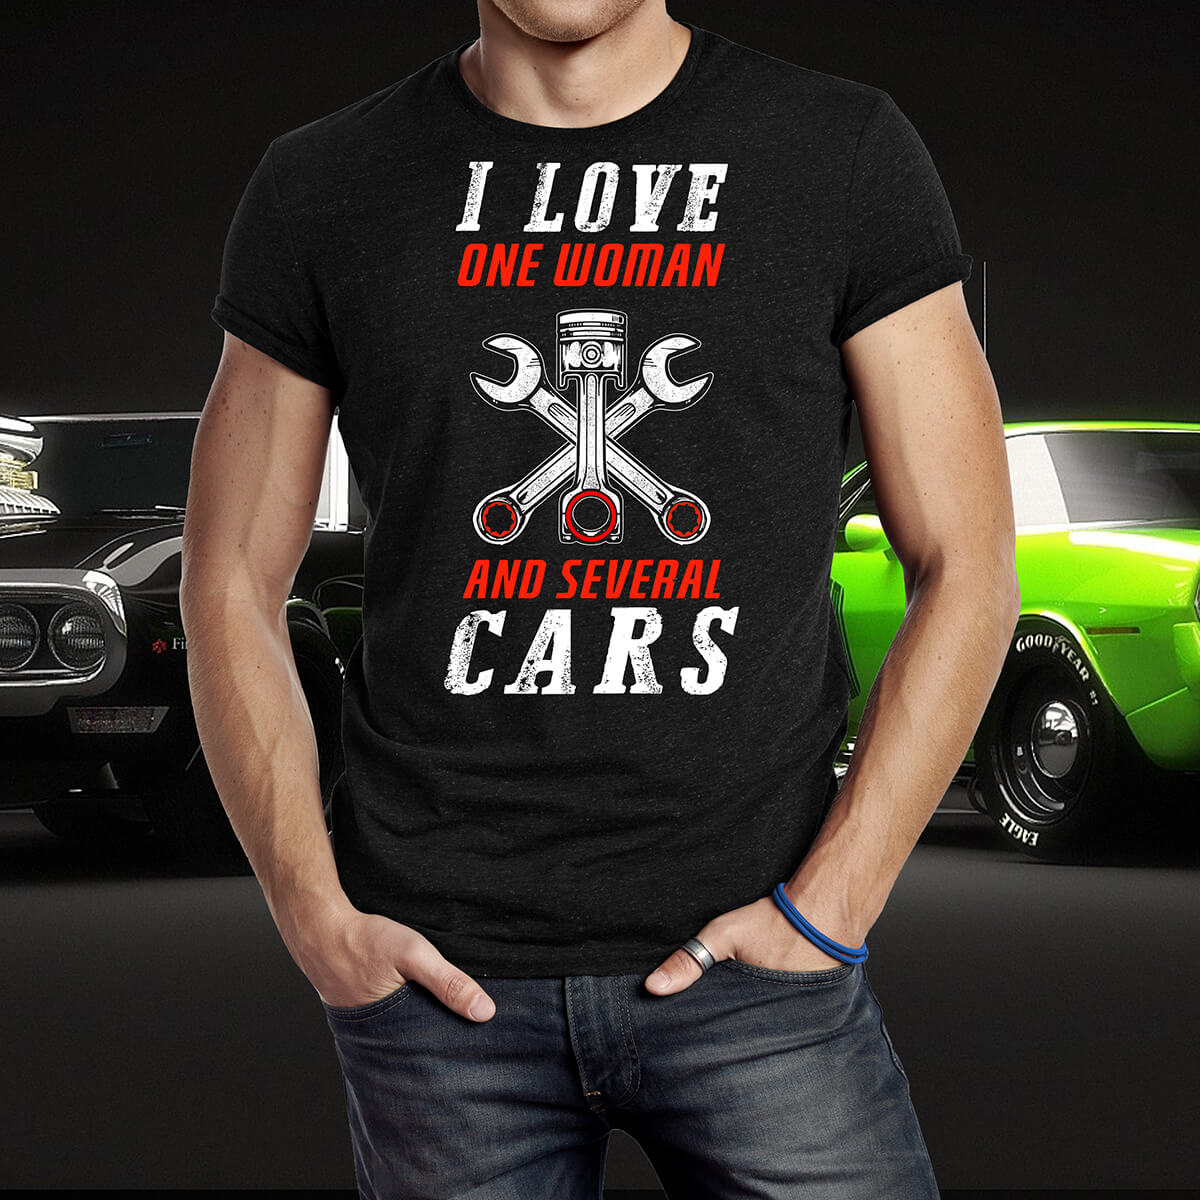 I LOVE ONE WOMAN AND SEVERAL CARS T-SHIRT